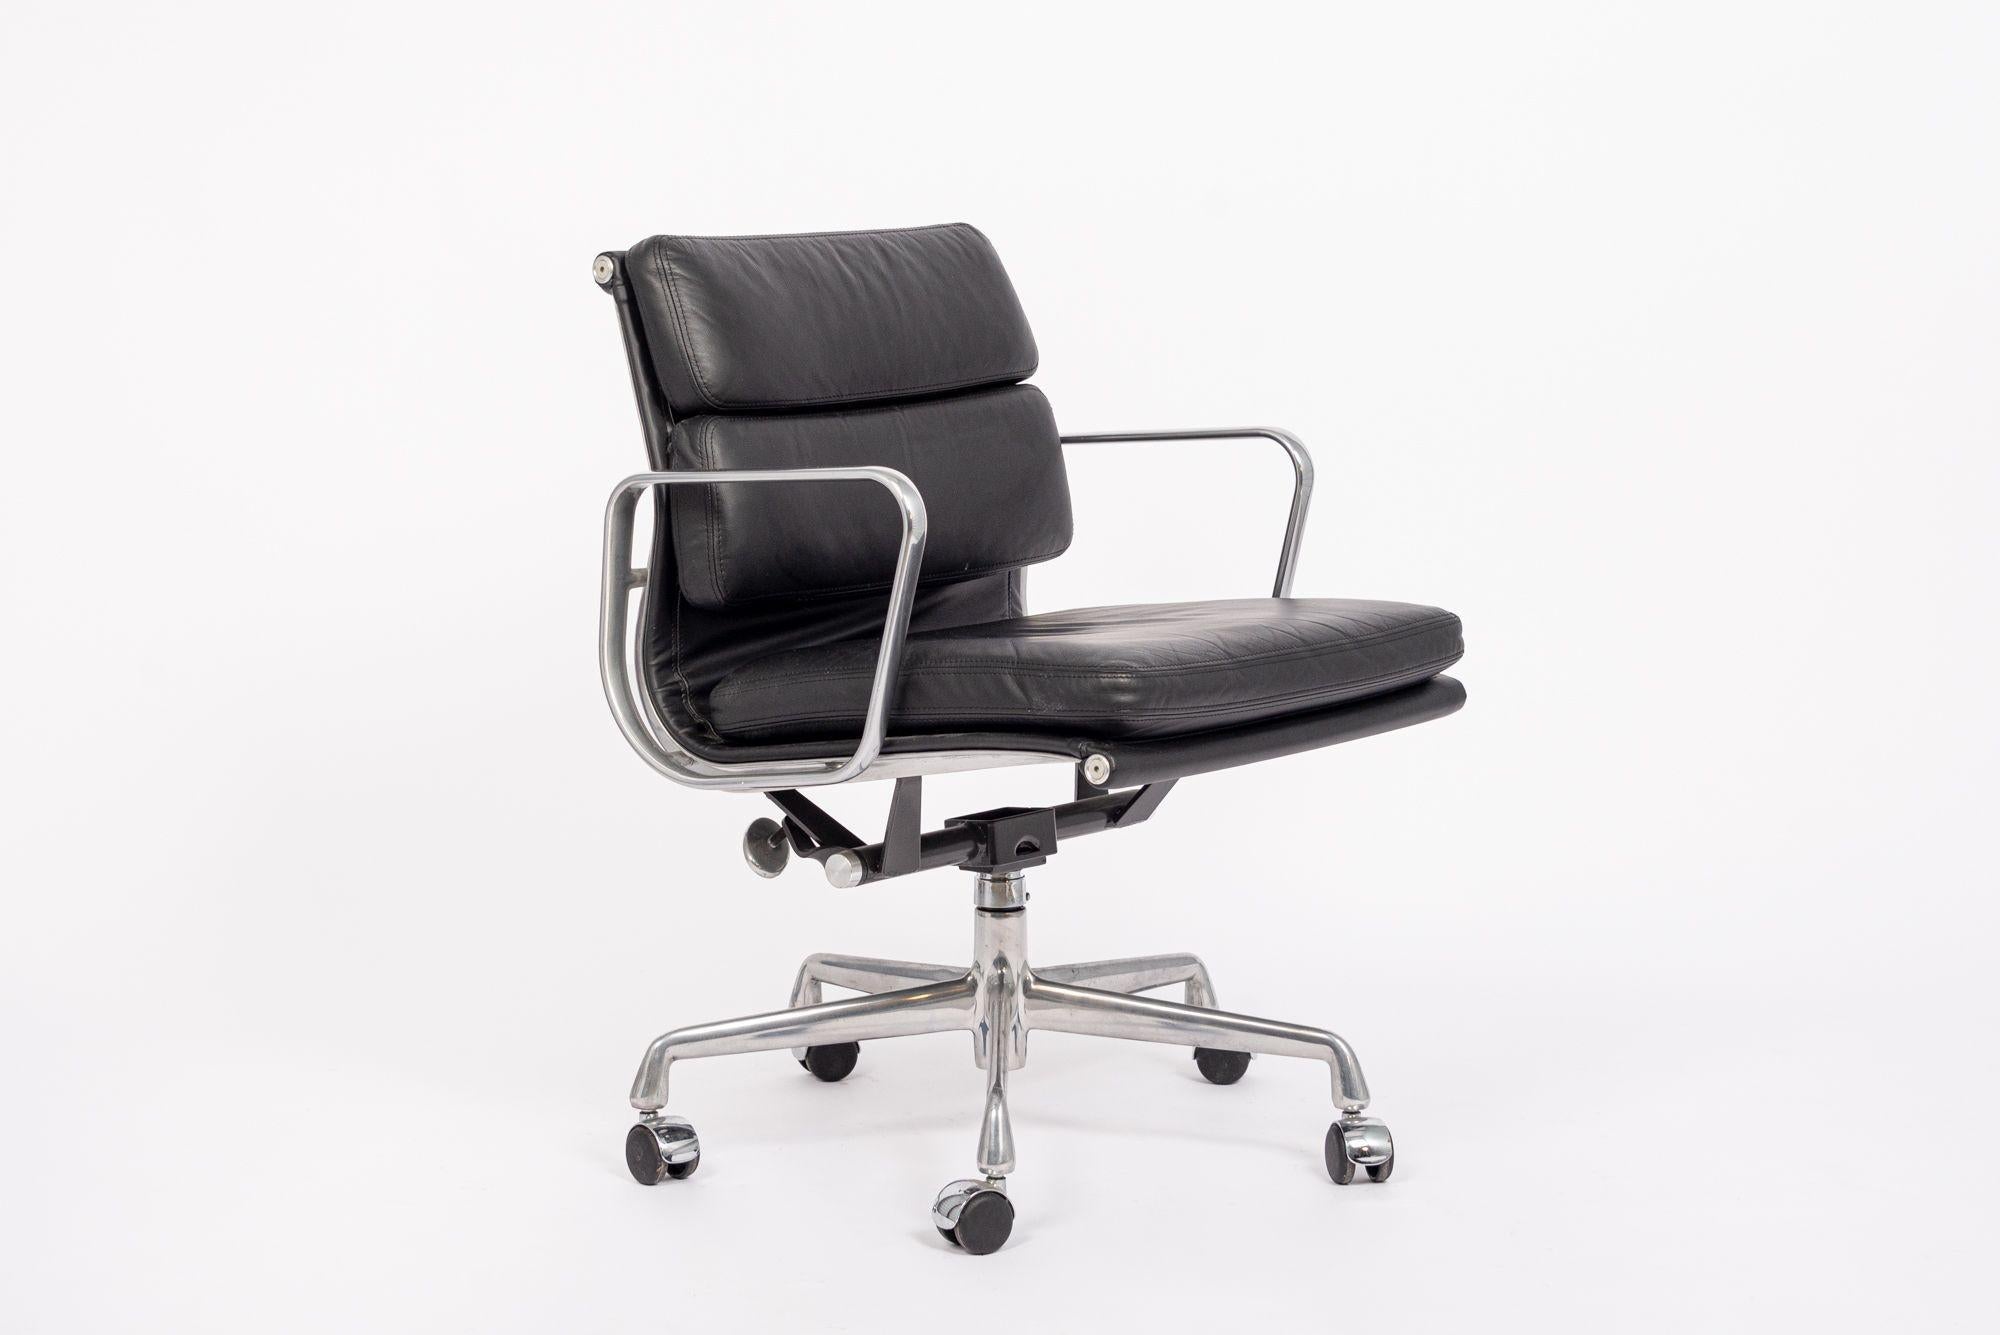 2001 Eames Herman Miller Black Leather Desk Chairs Aluminum Group For Sale 6